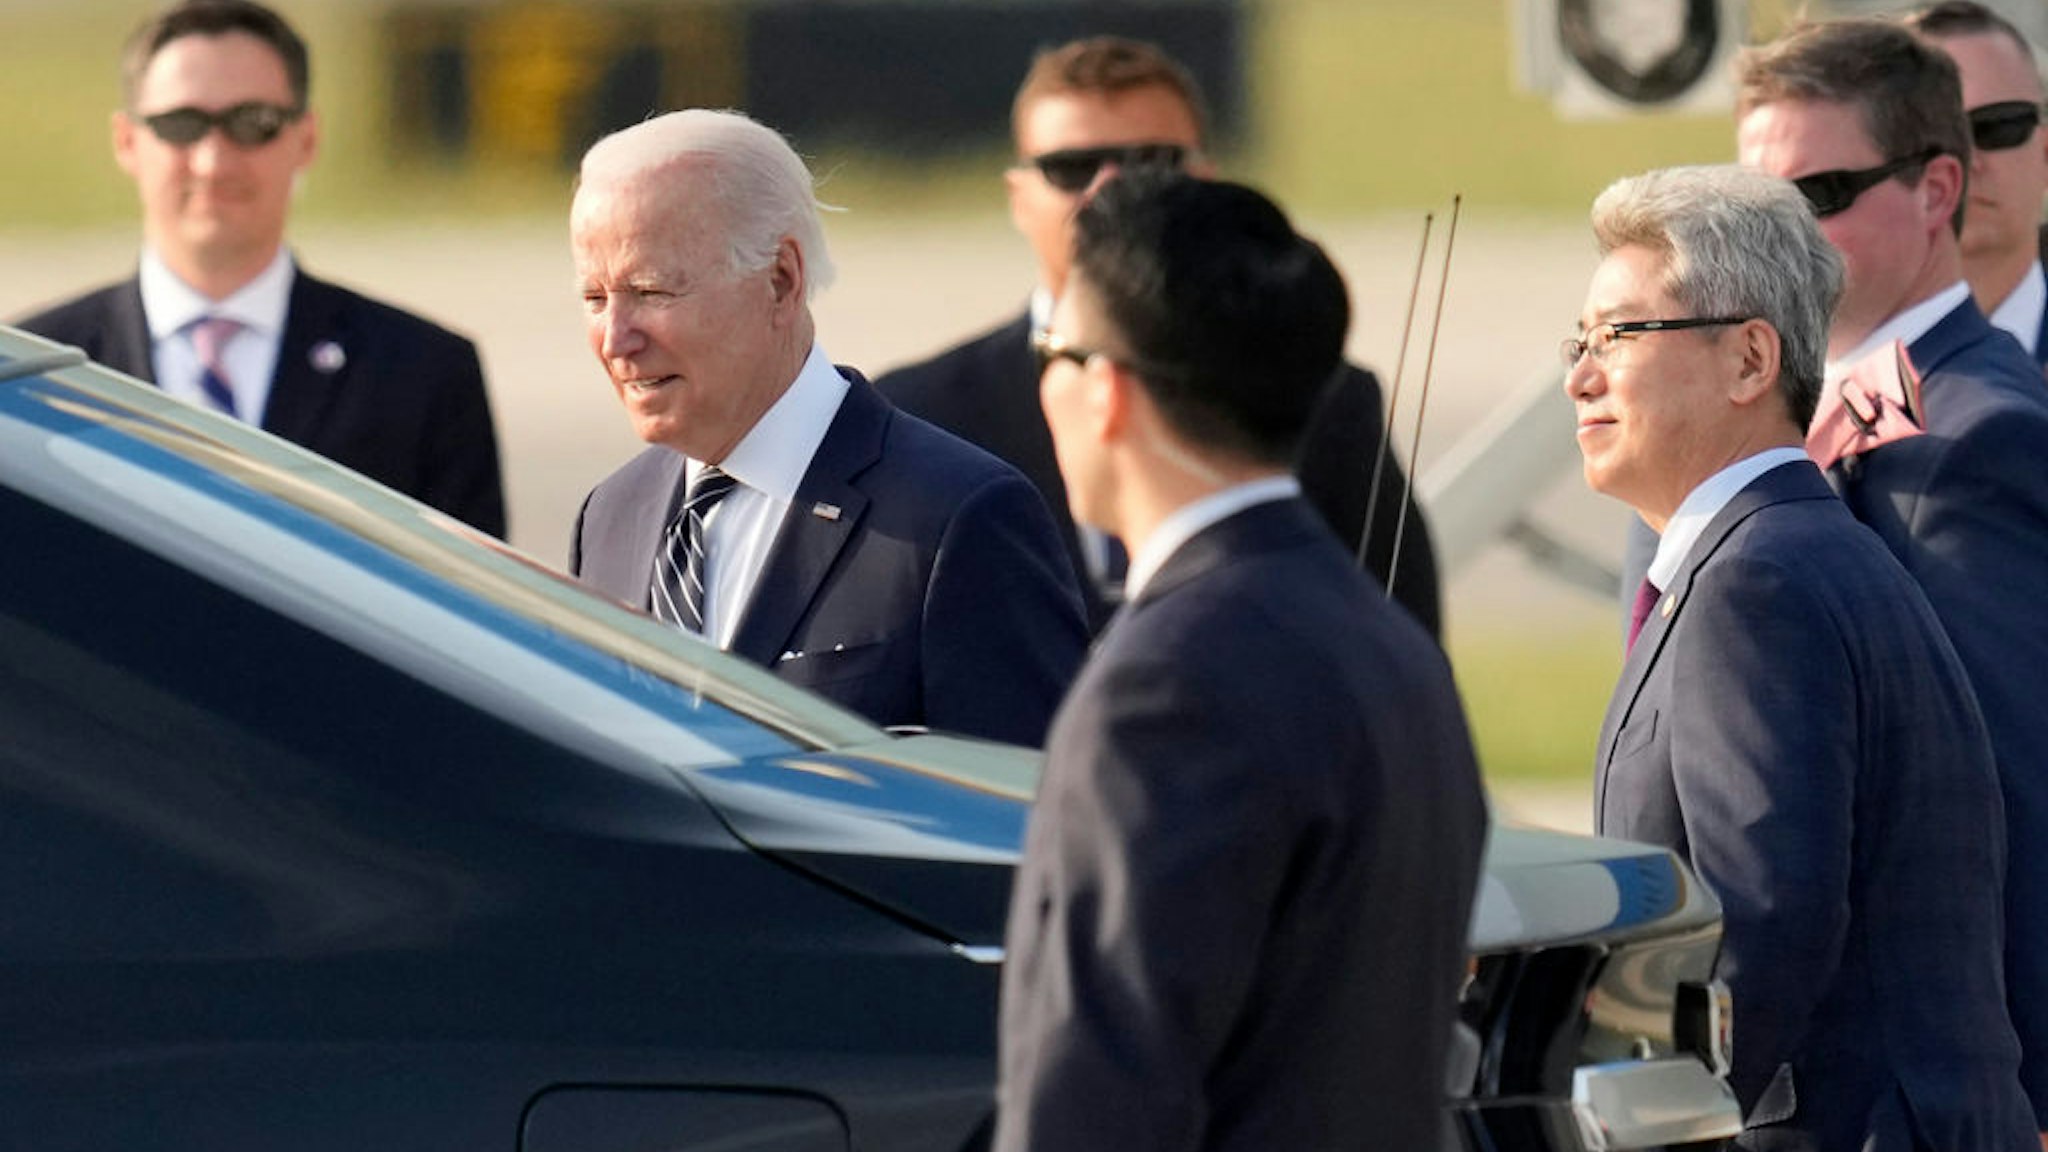 As President Biden arrived in South Korea, two Secret Service employees were being sent home after a booze-fueled incident